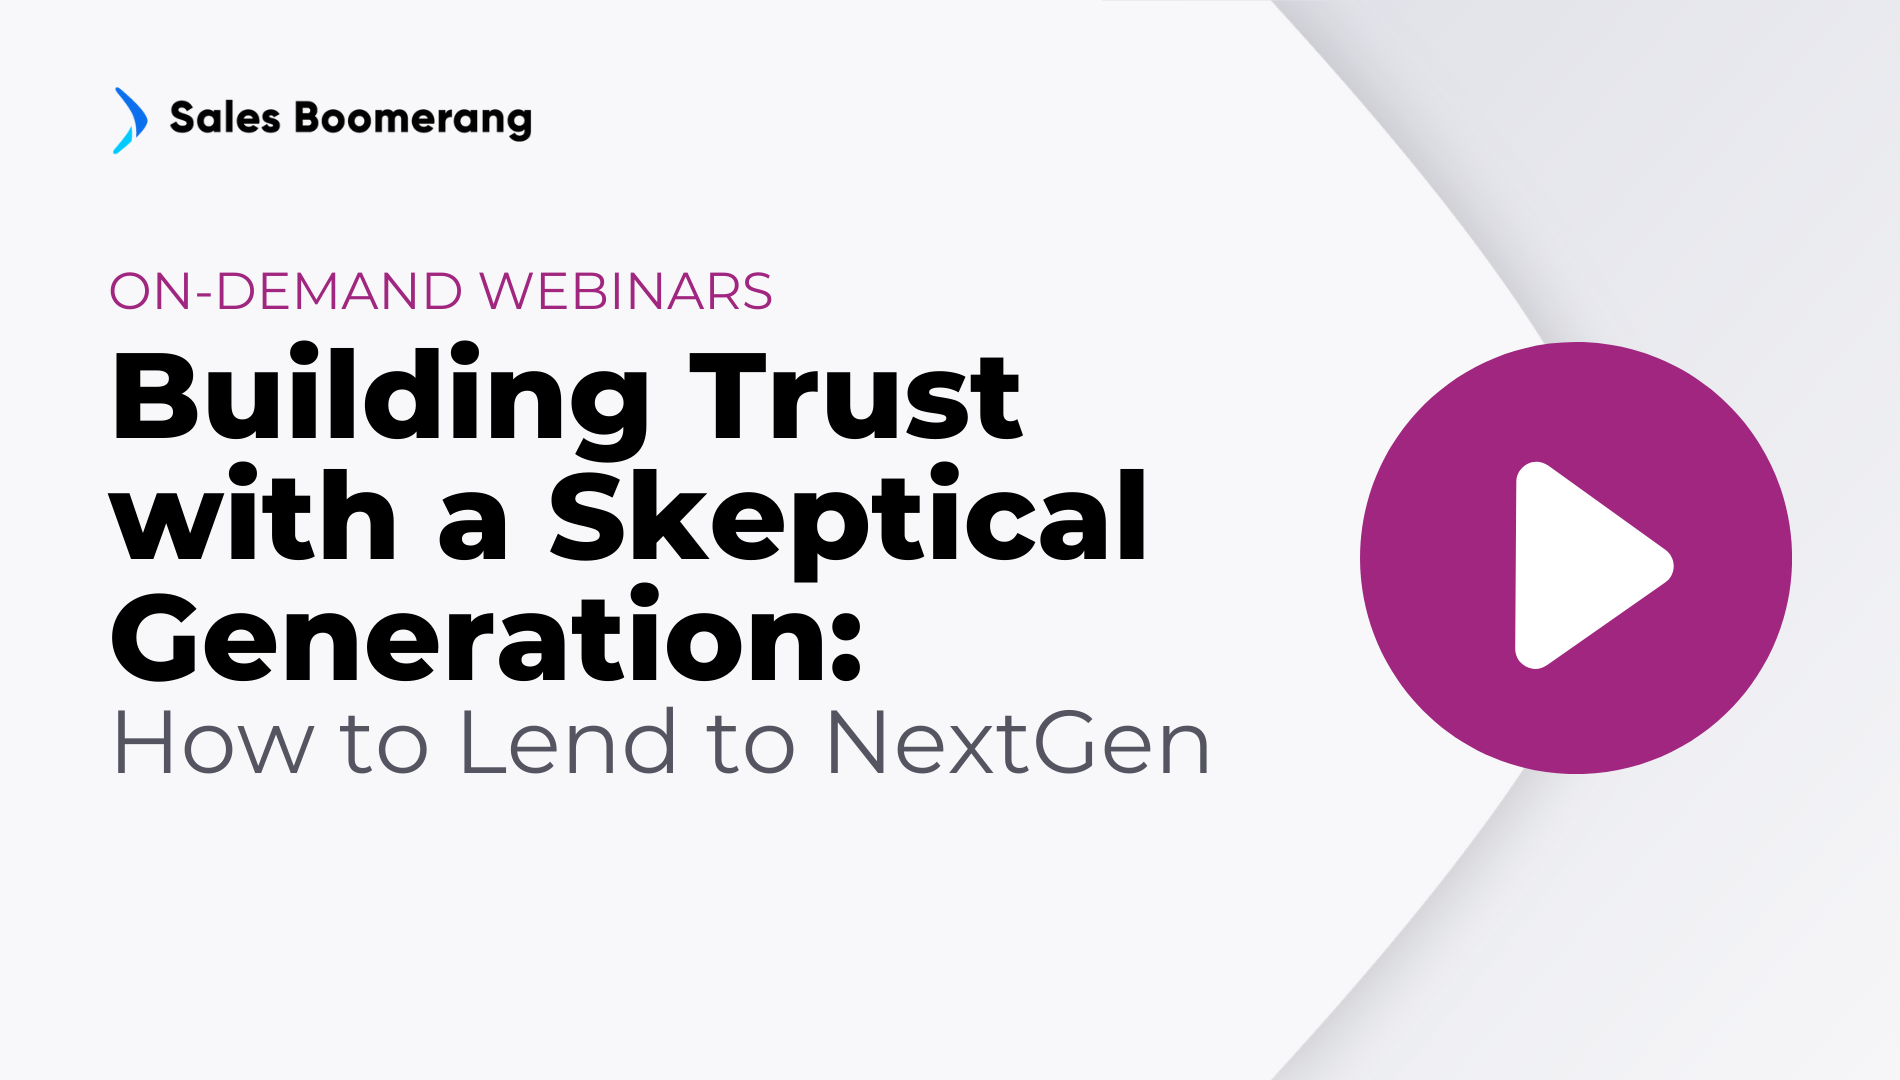 Building Trust with a Skeptical Generation: How to Lend to NextGen